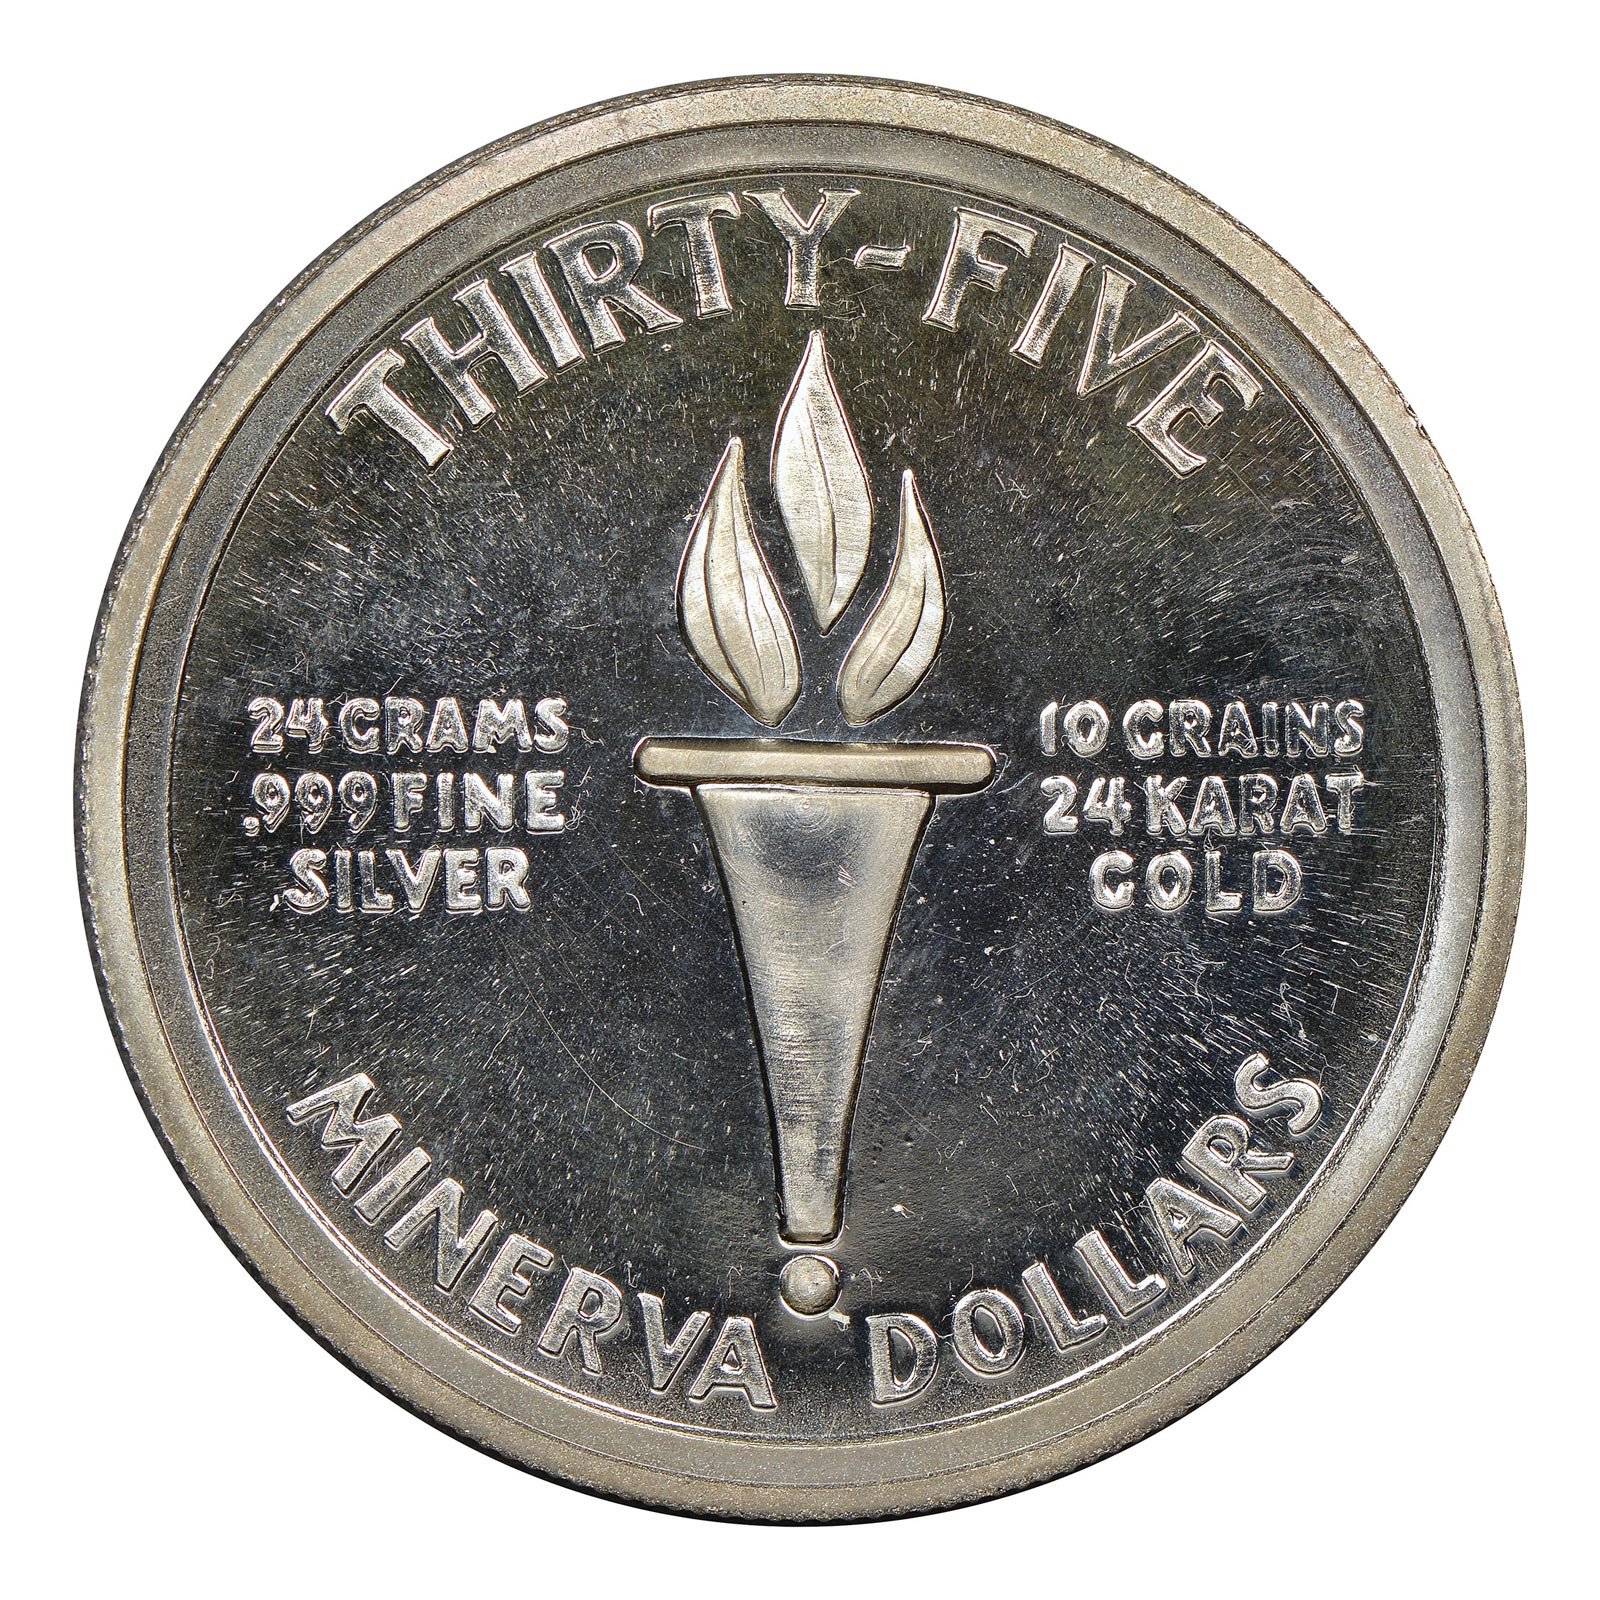 The back of a gold-and-silver coin issued in 1973 by the Republic of Minerva, a former micronation located in the South Pacific Ocean.